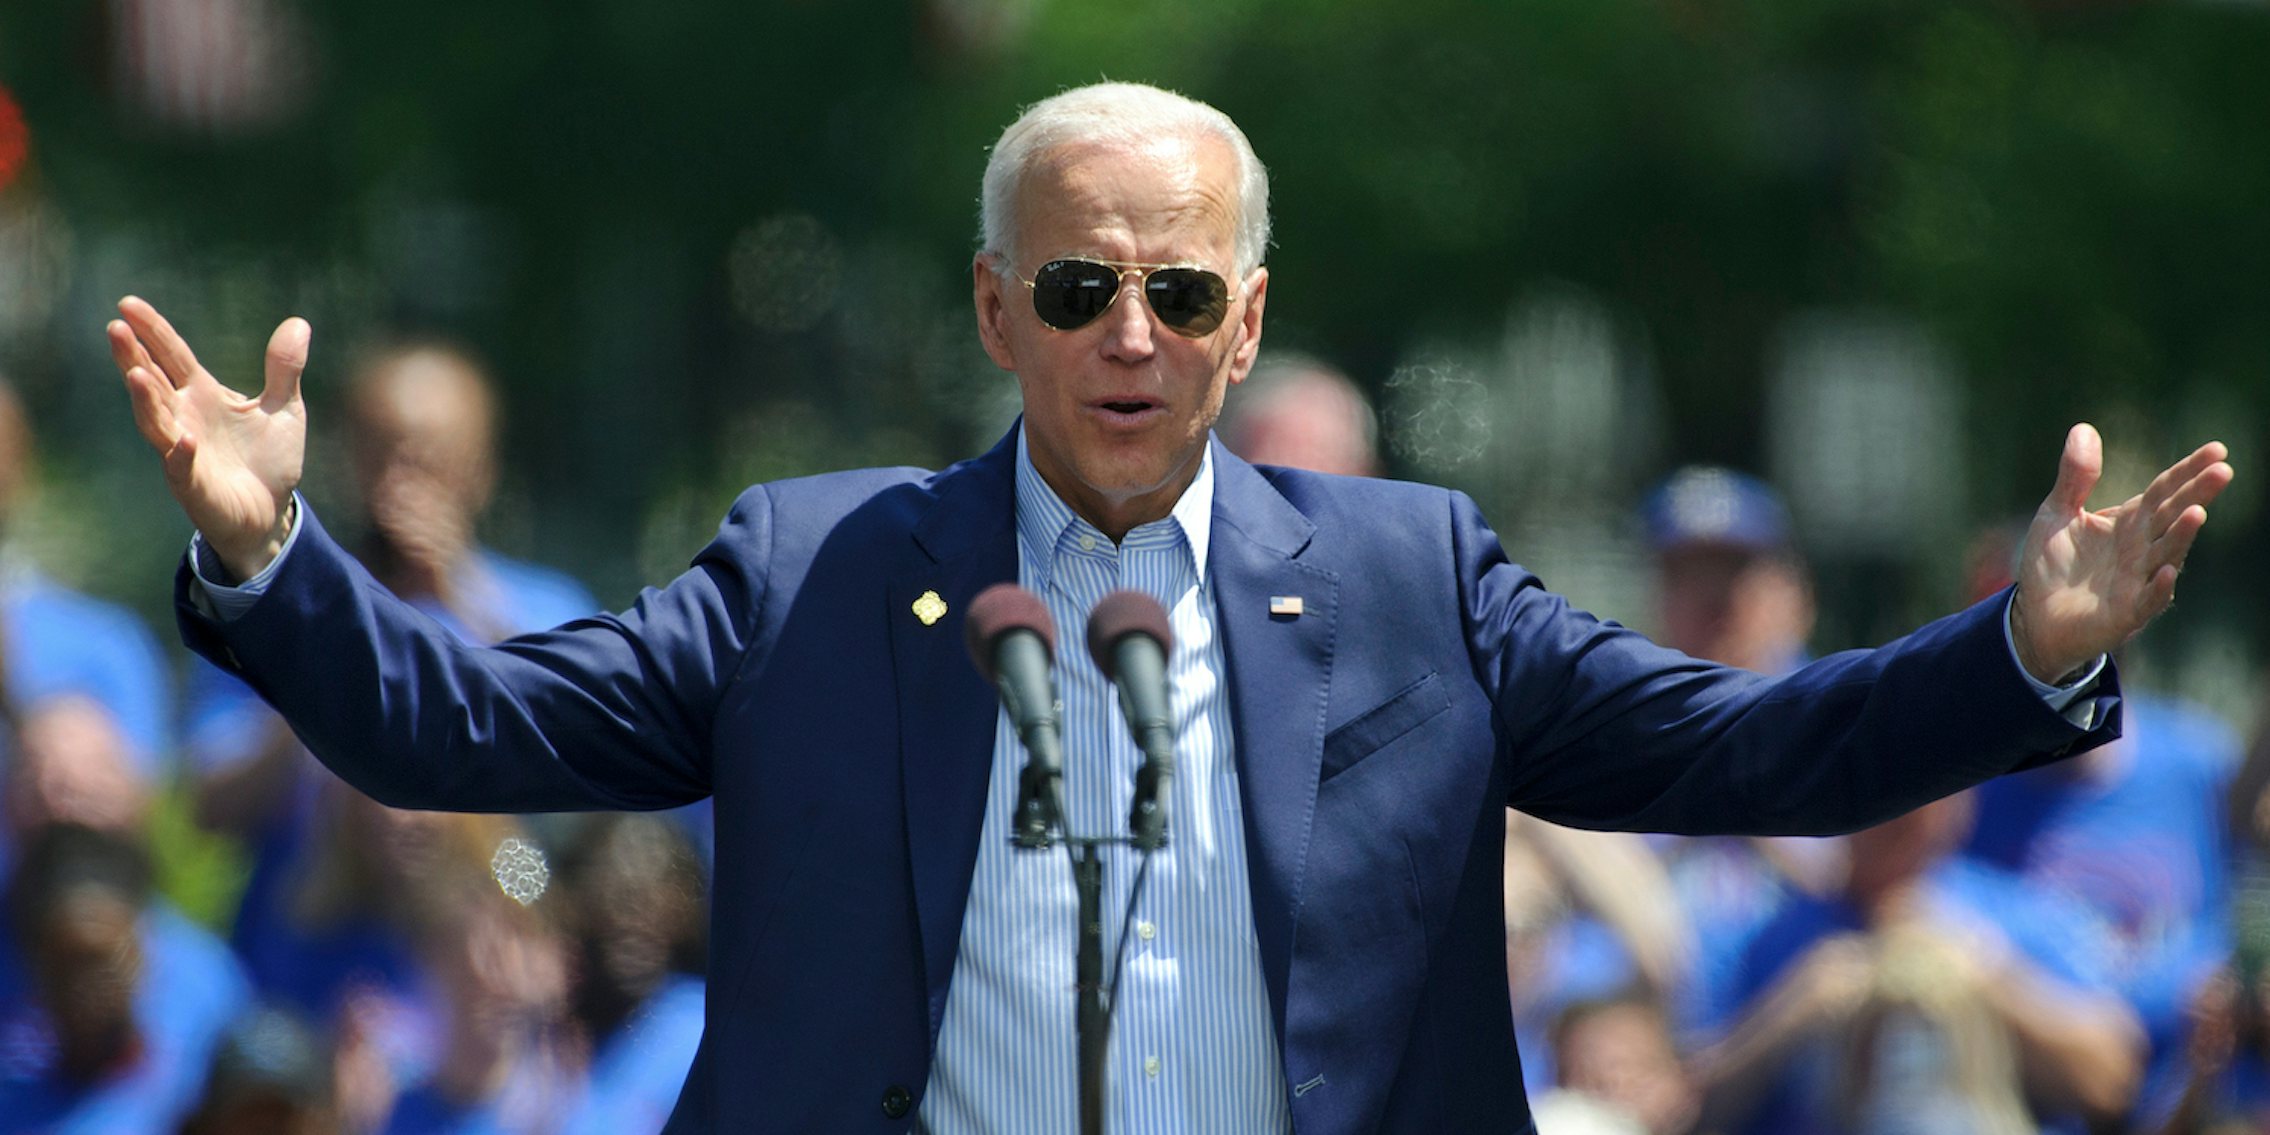 Karens more likely to vote for Biden than Trump